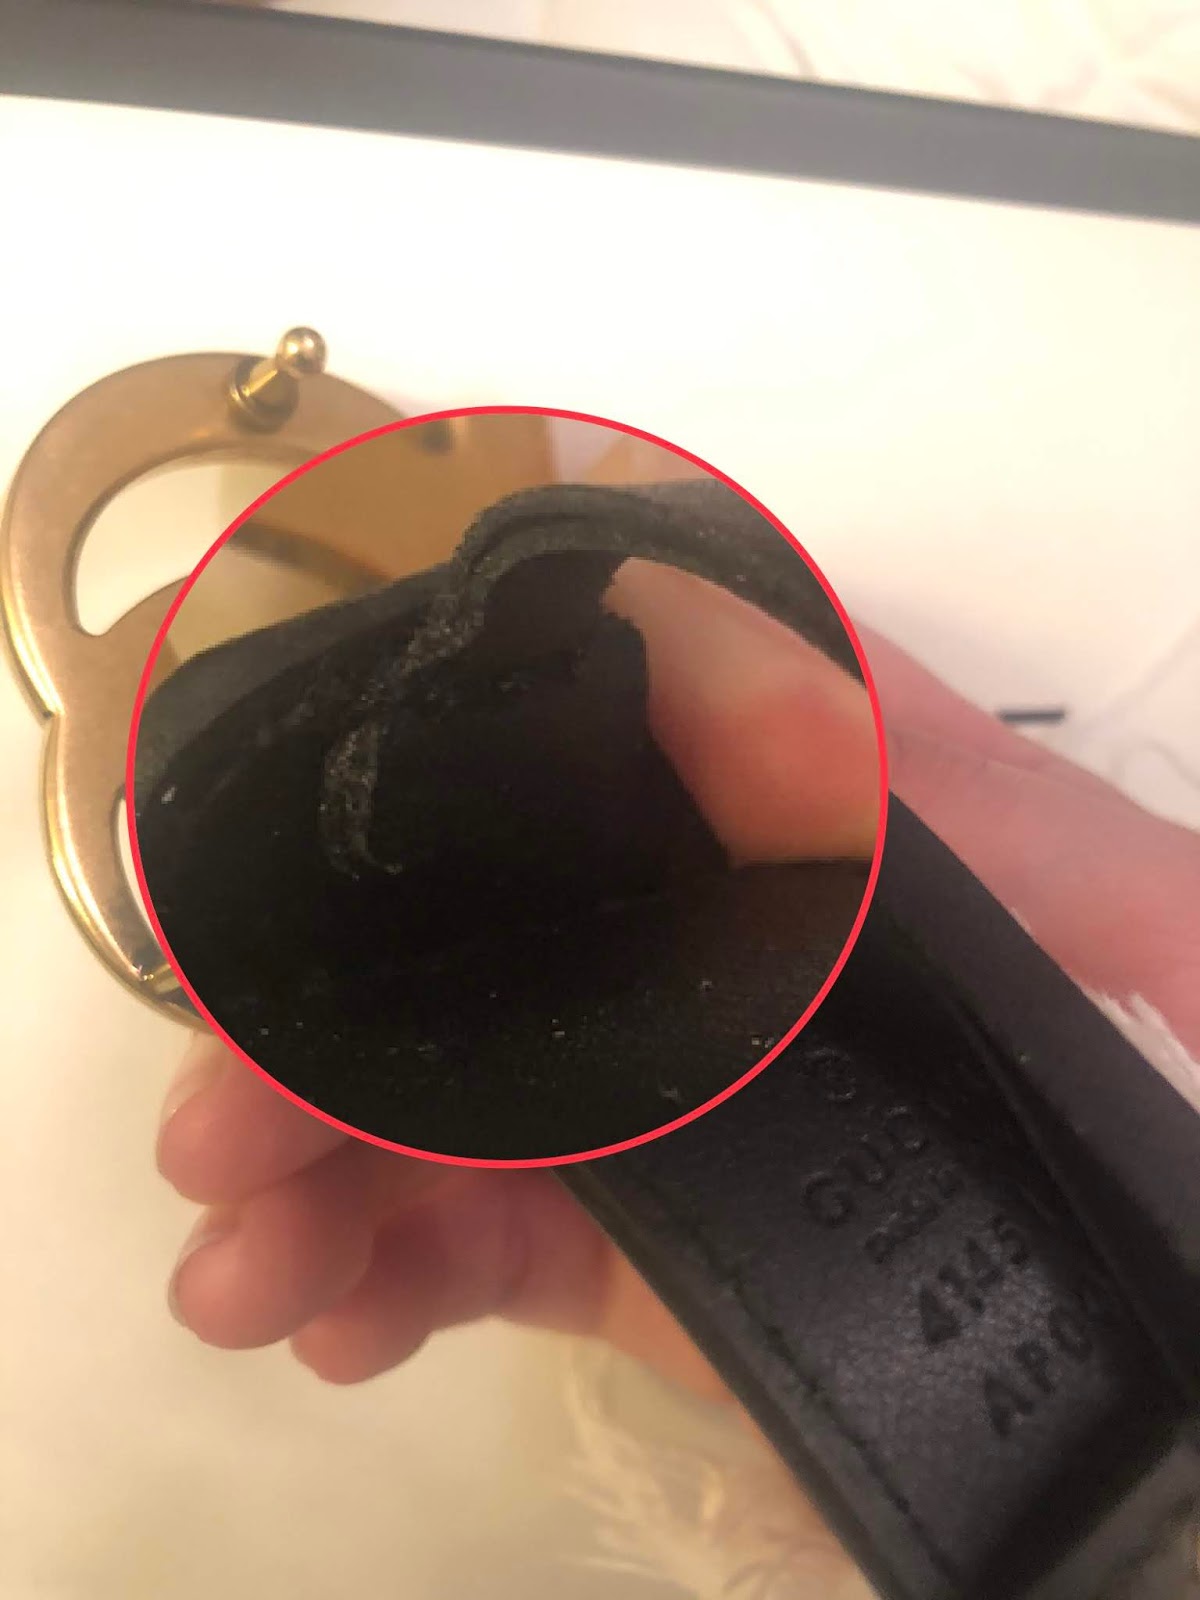 Inconsistent Getalenteerd computer 12 Ways To Tell if Your Gucci Belt is Fake - Her Closet Image